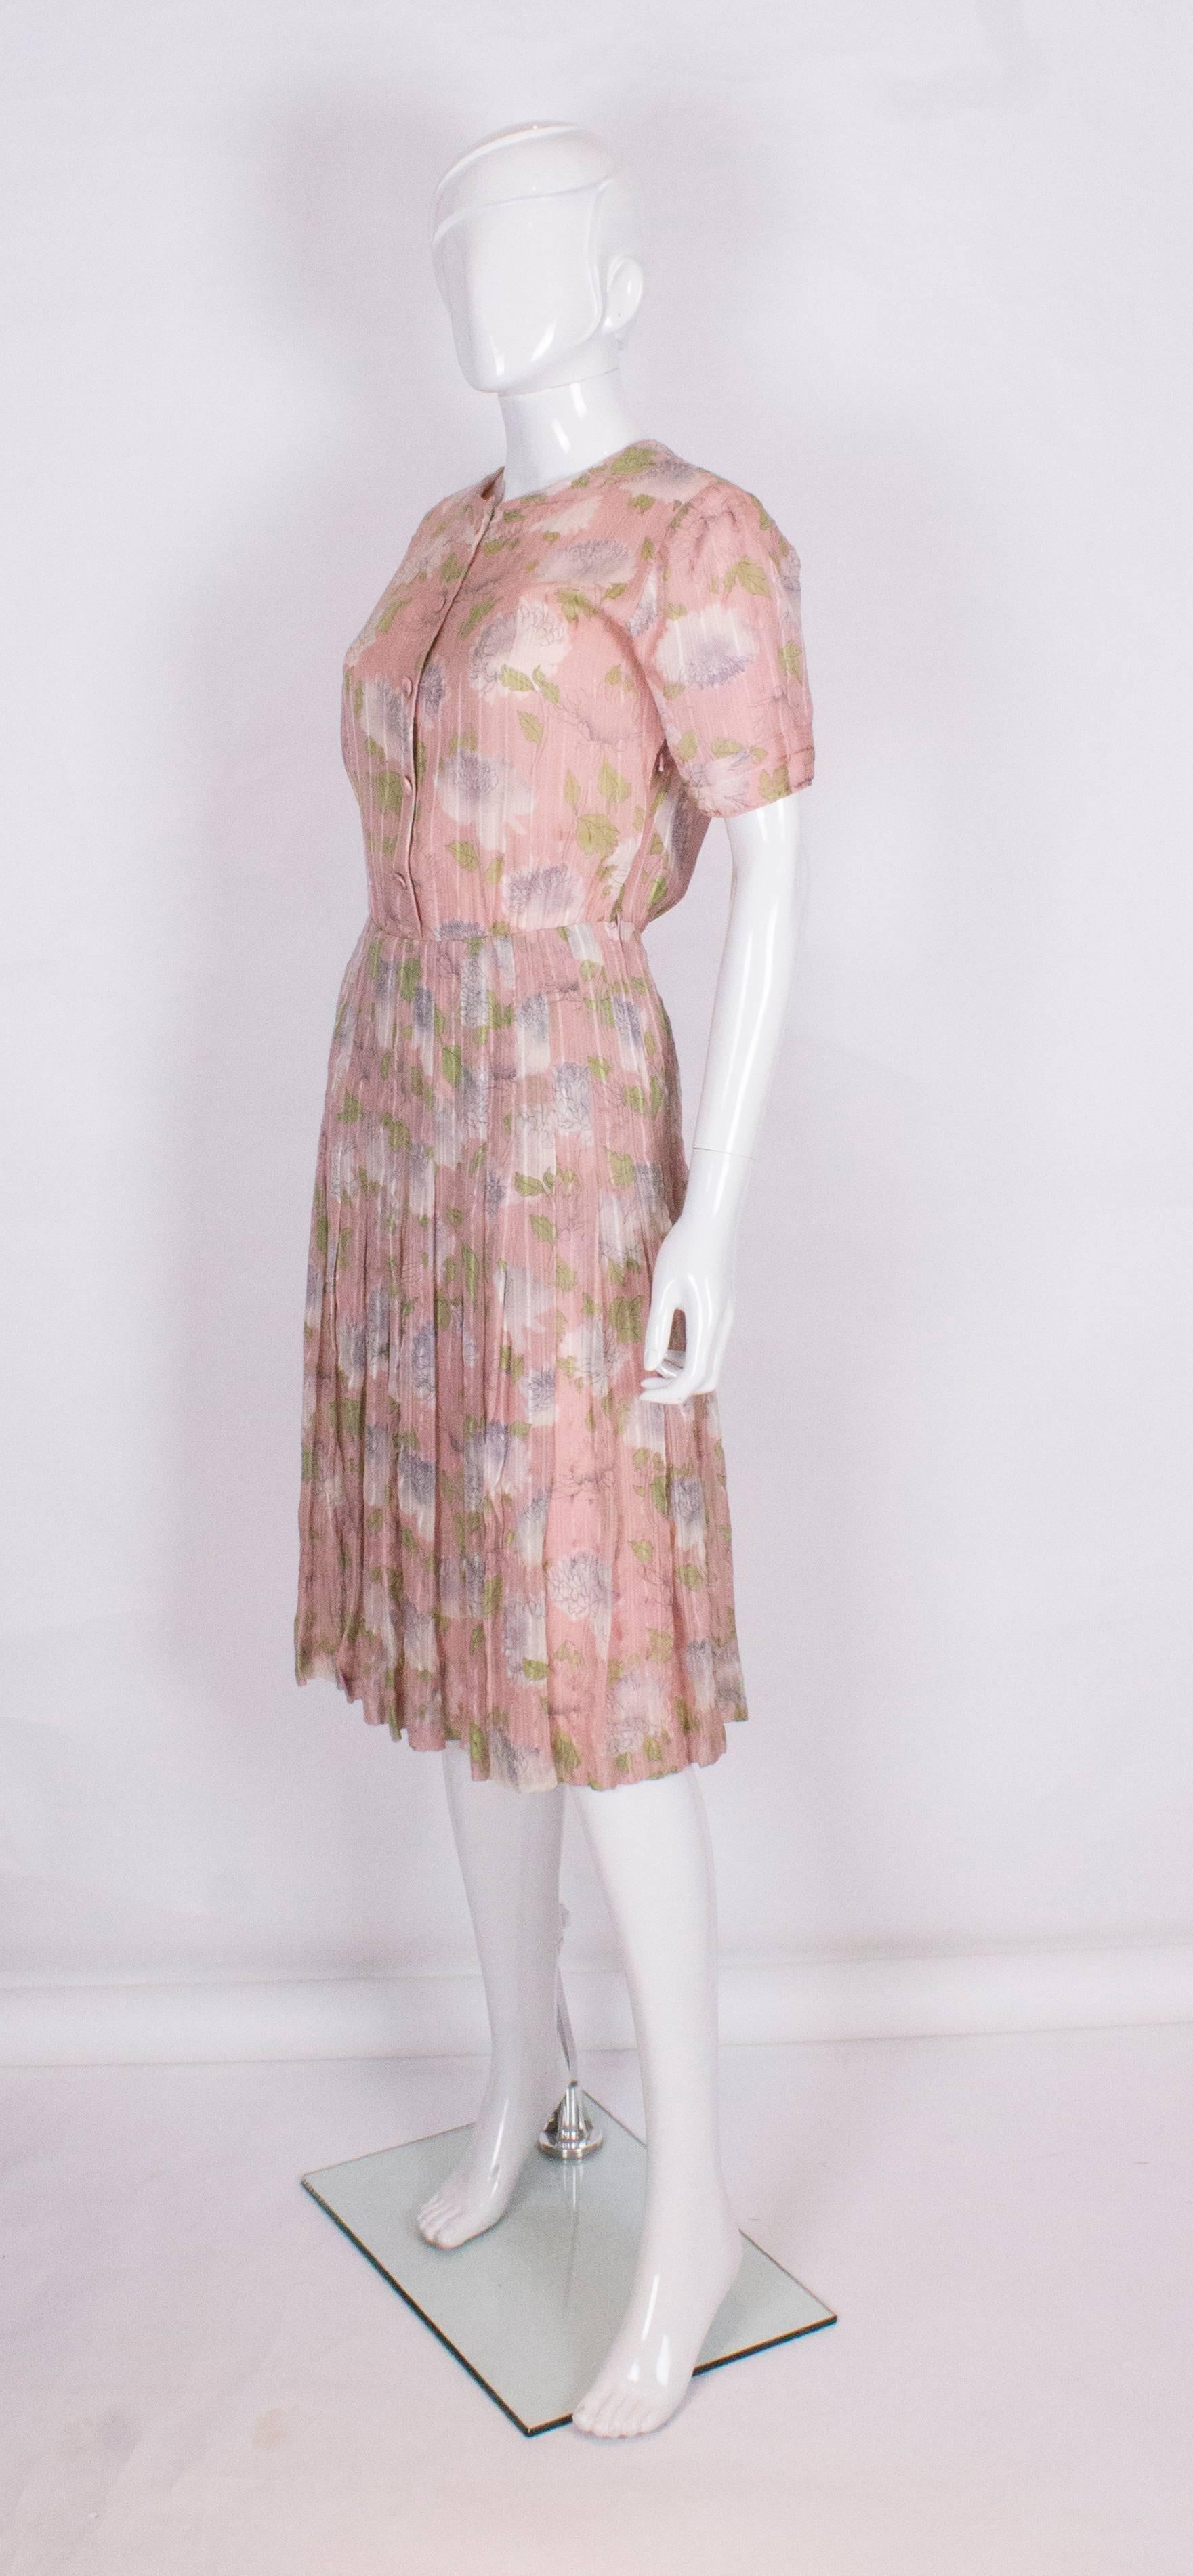 A stylish slk day dress.The dress has a pink background, with a green ,cream and grey floral design. It has a round neckline , with a 5 button opening at the front, and a side zip opening.There are 7'' sewn down pleats from the waist, giving a